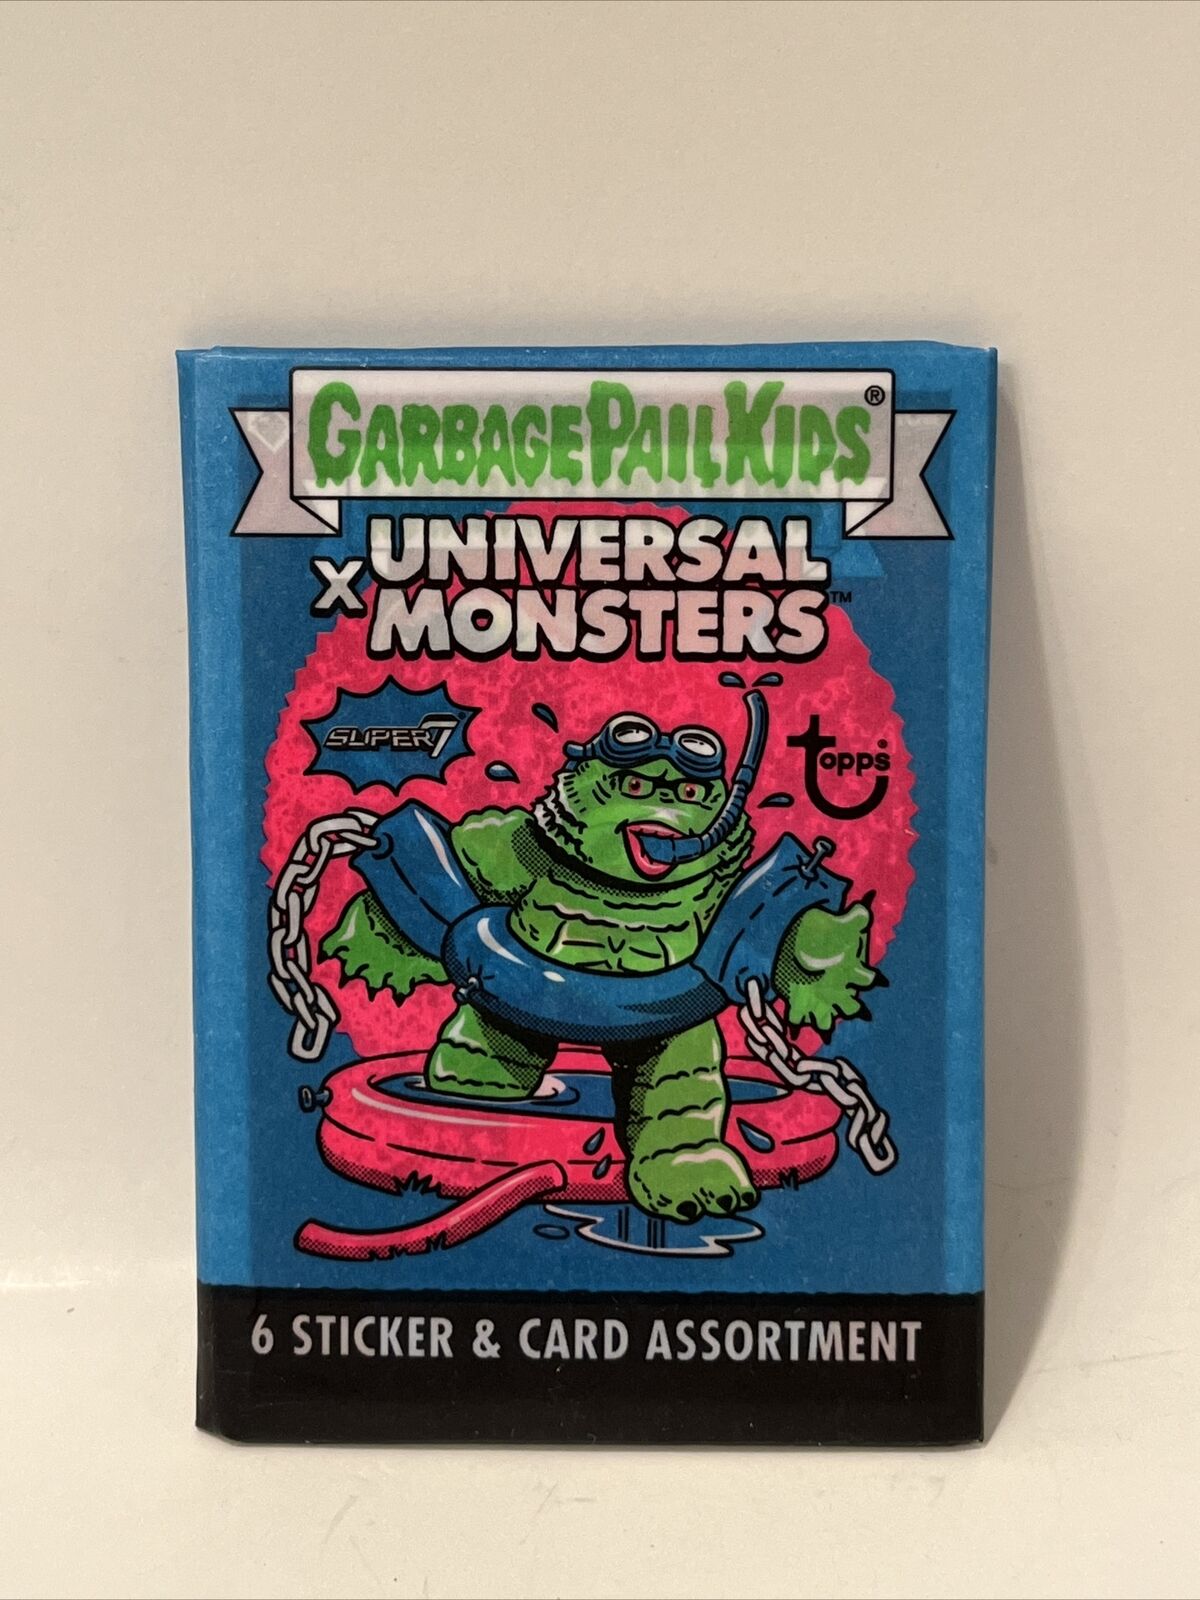 Garbage Pail Kids X Universal Monsters Sealed Pack Super 7 6 Cards Topps GPK